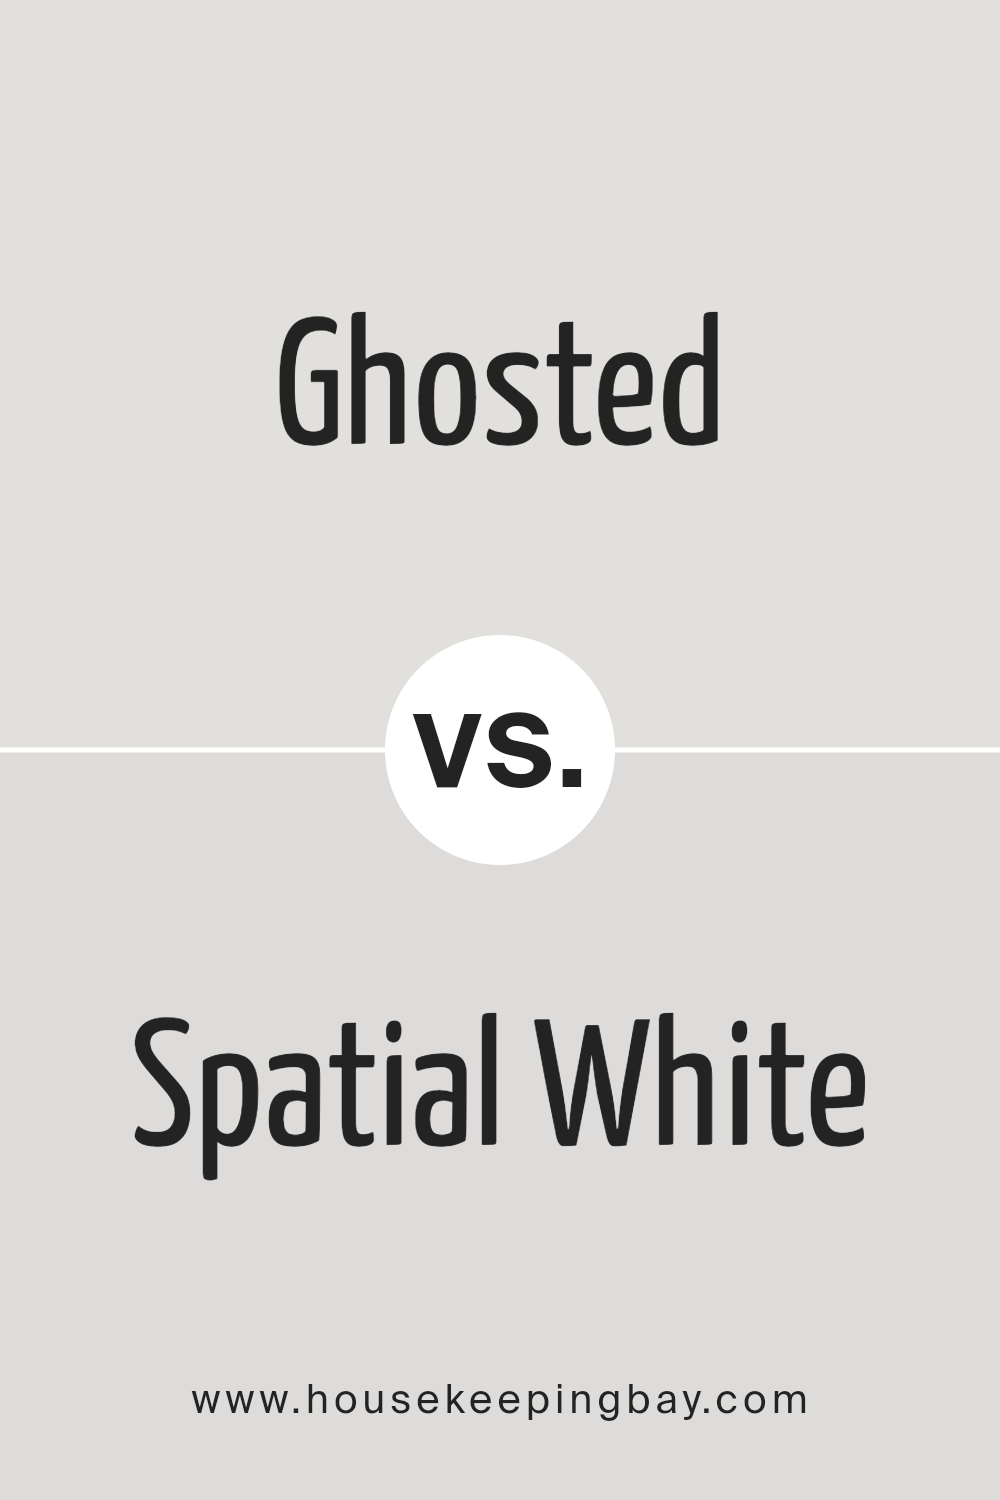 ghosted_sw_9545_vs_spatial_white_sw_6259